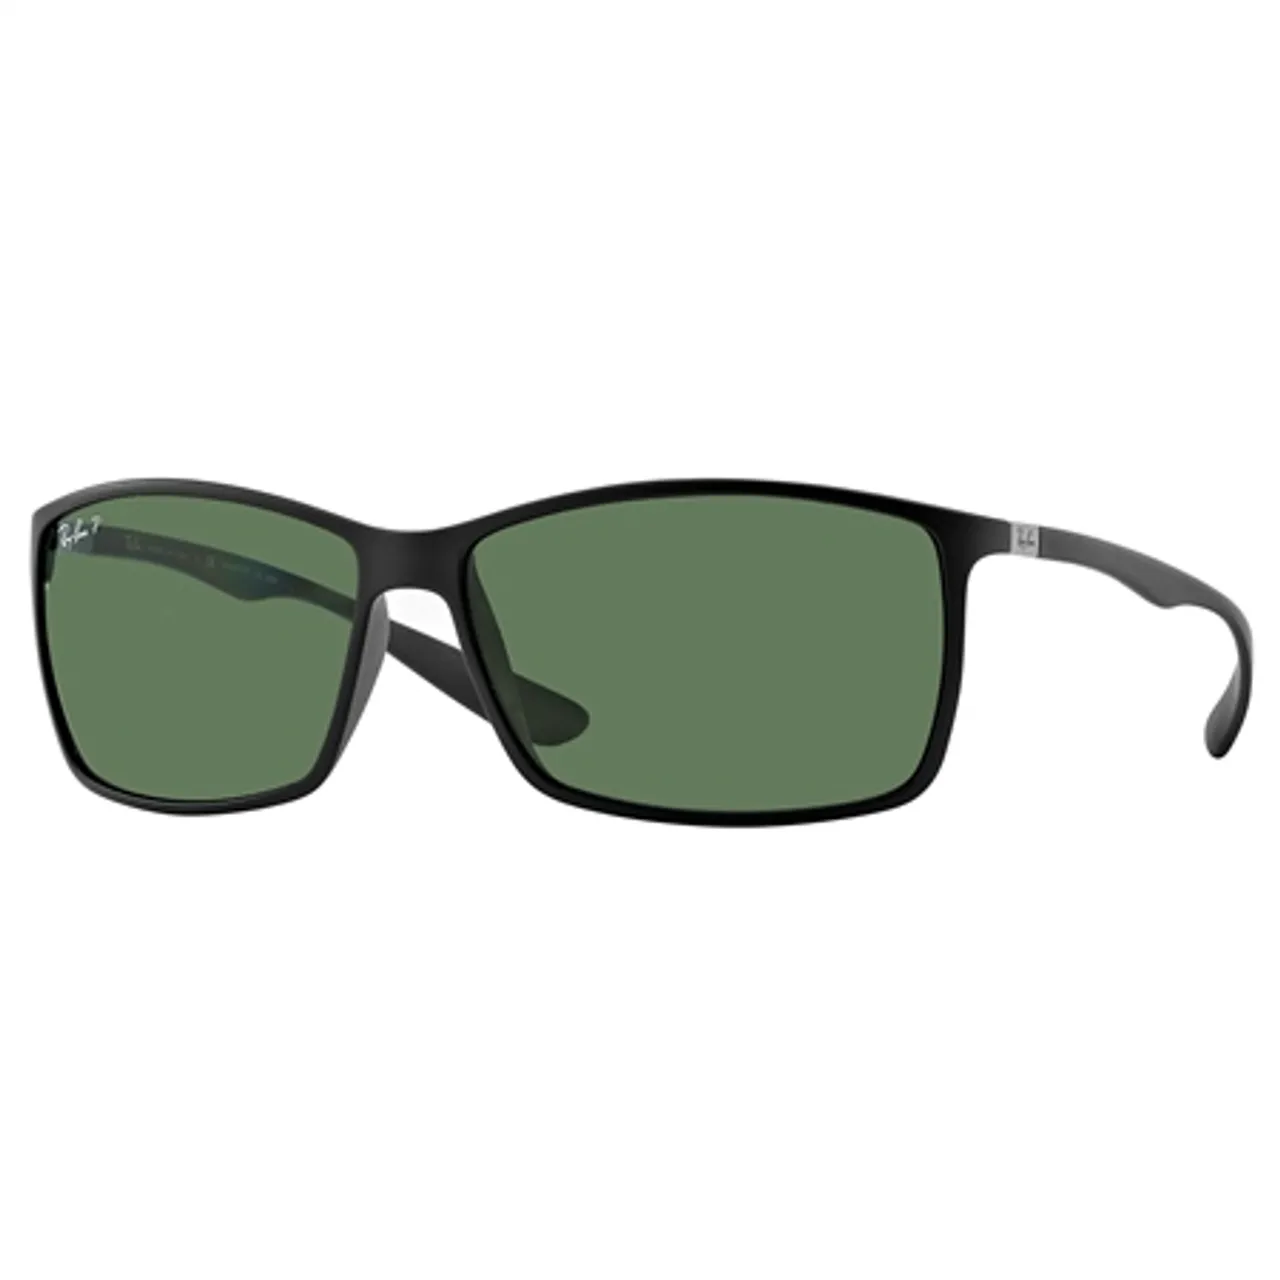 Ray-Ban RB4179 Sunglasses - Assorted